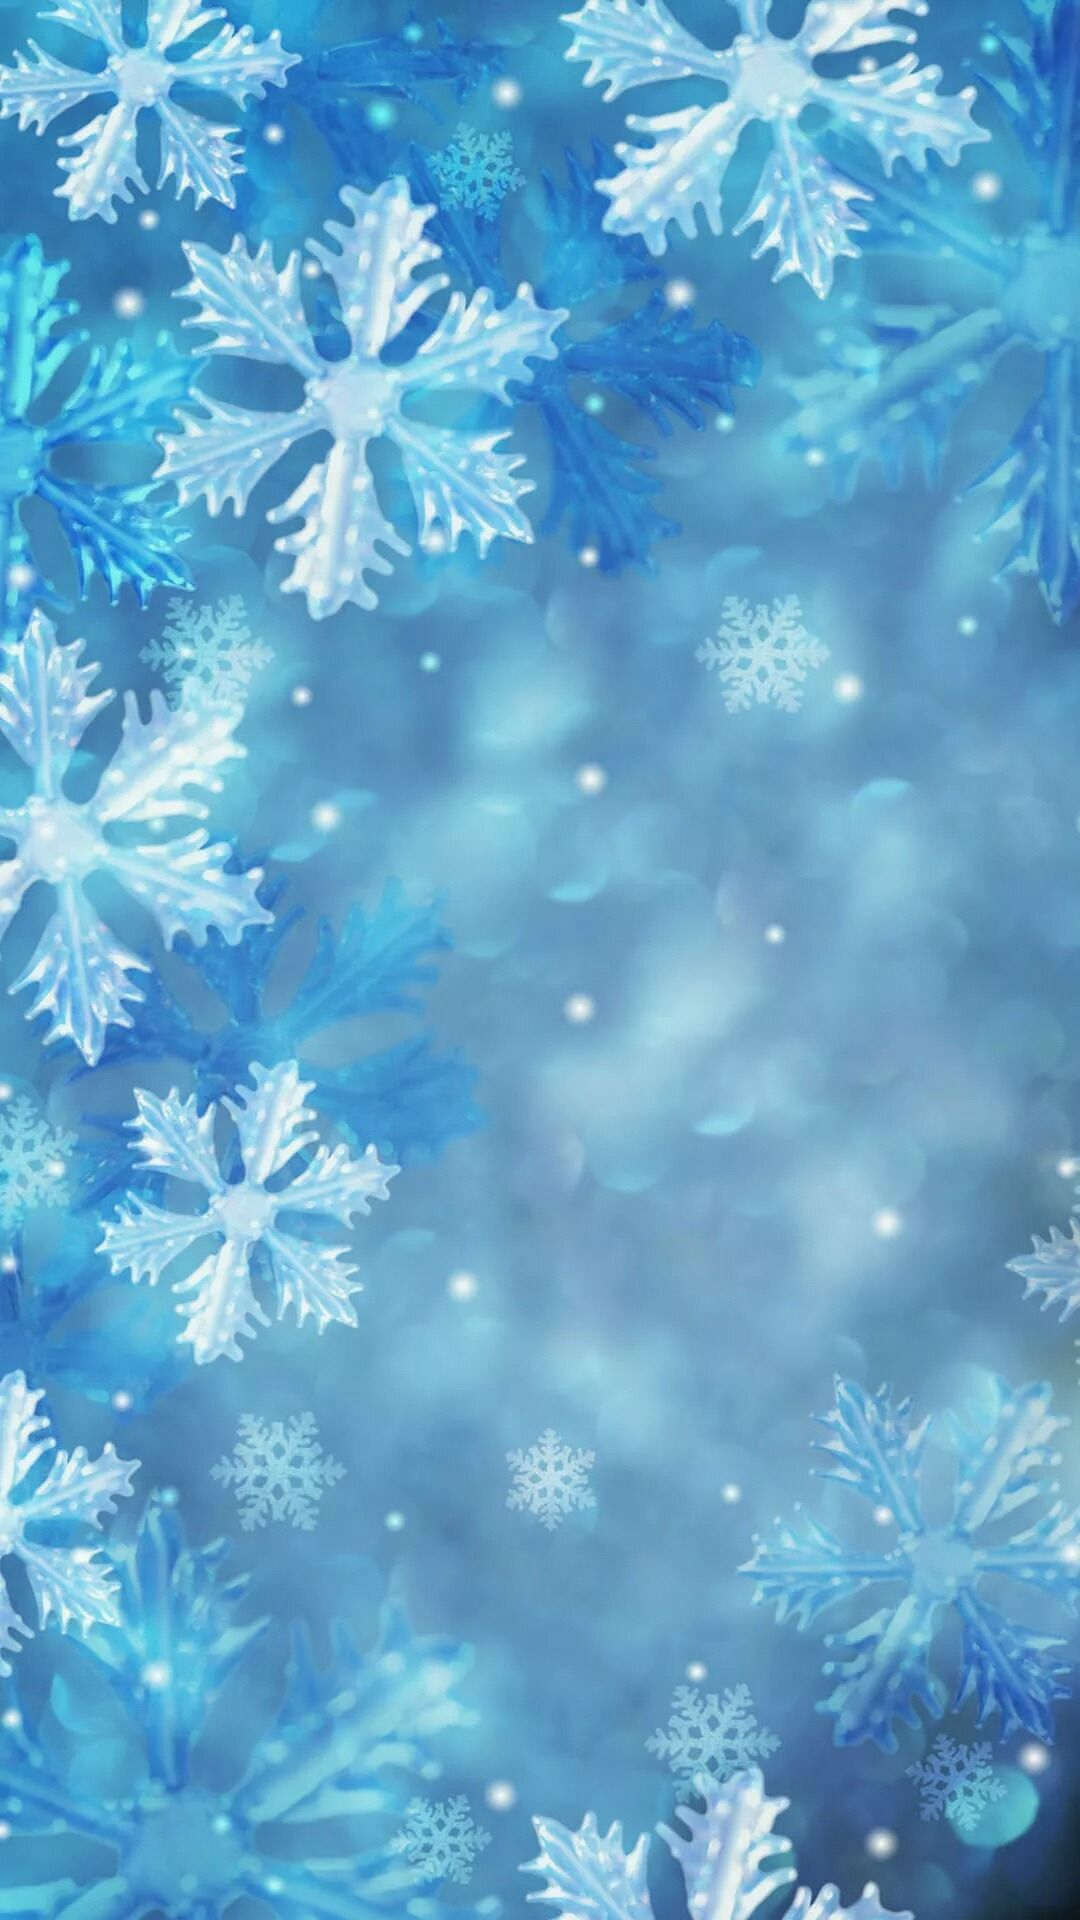 1080x1920 Blue snowflakes Tap to see more #beautiful #snow \u0026 #snowflakes #winter wallpaper @mobile9 | Winter wallpaper, Winter background, Iphone wallpaper winter